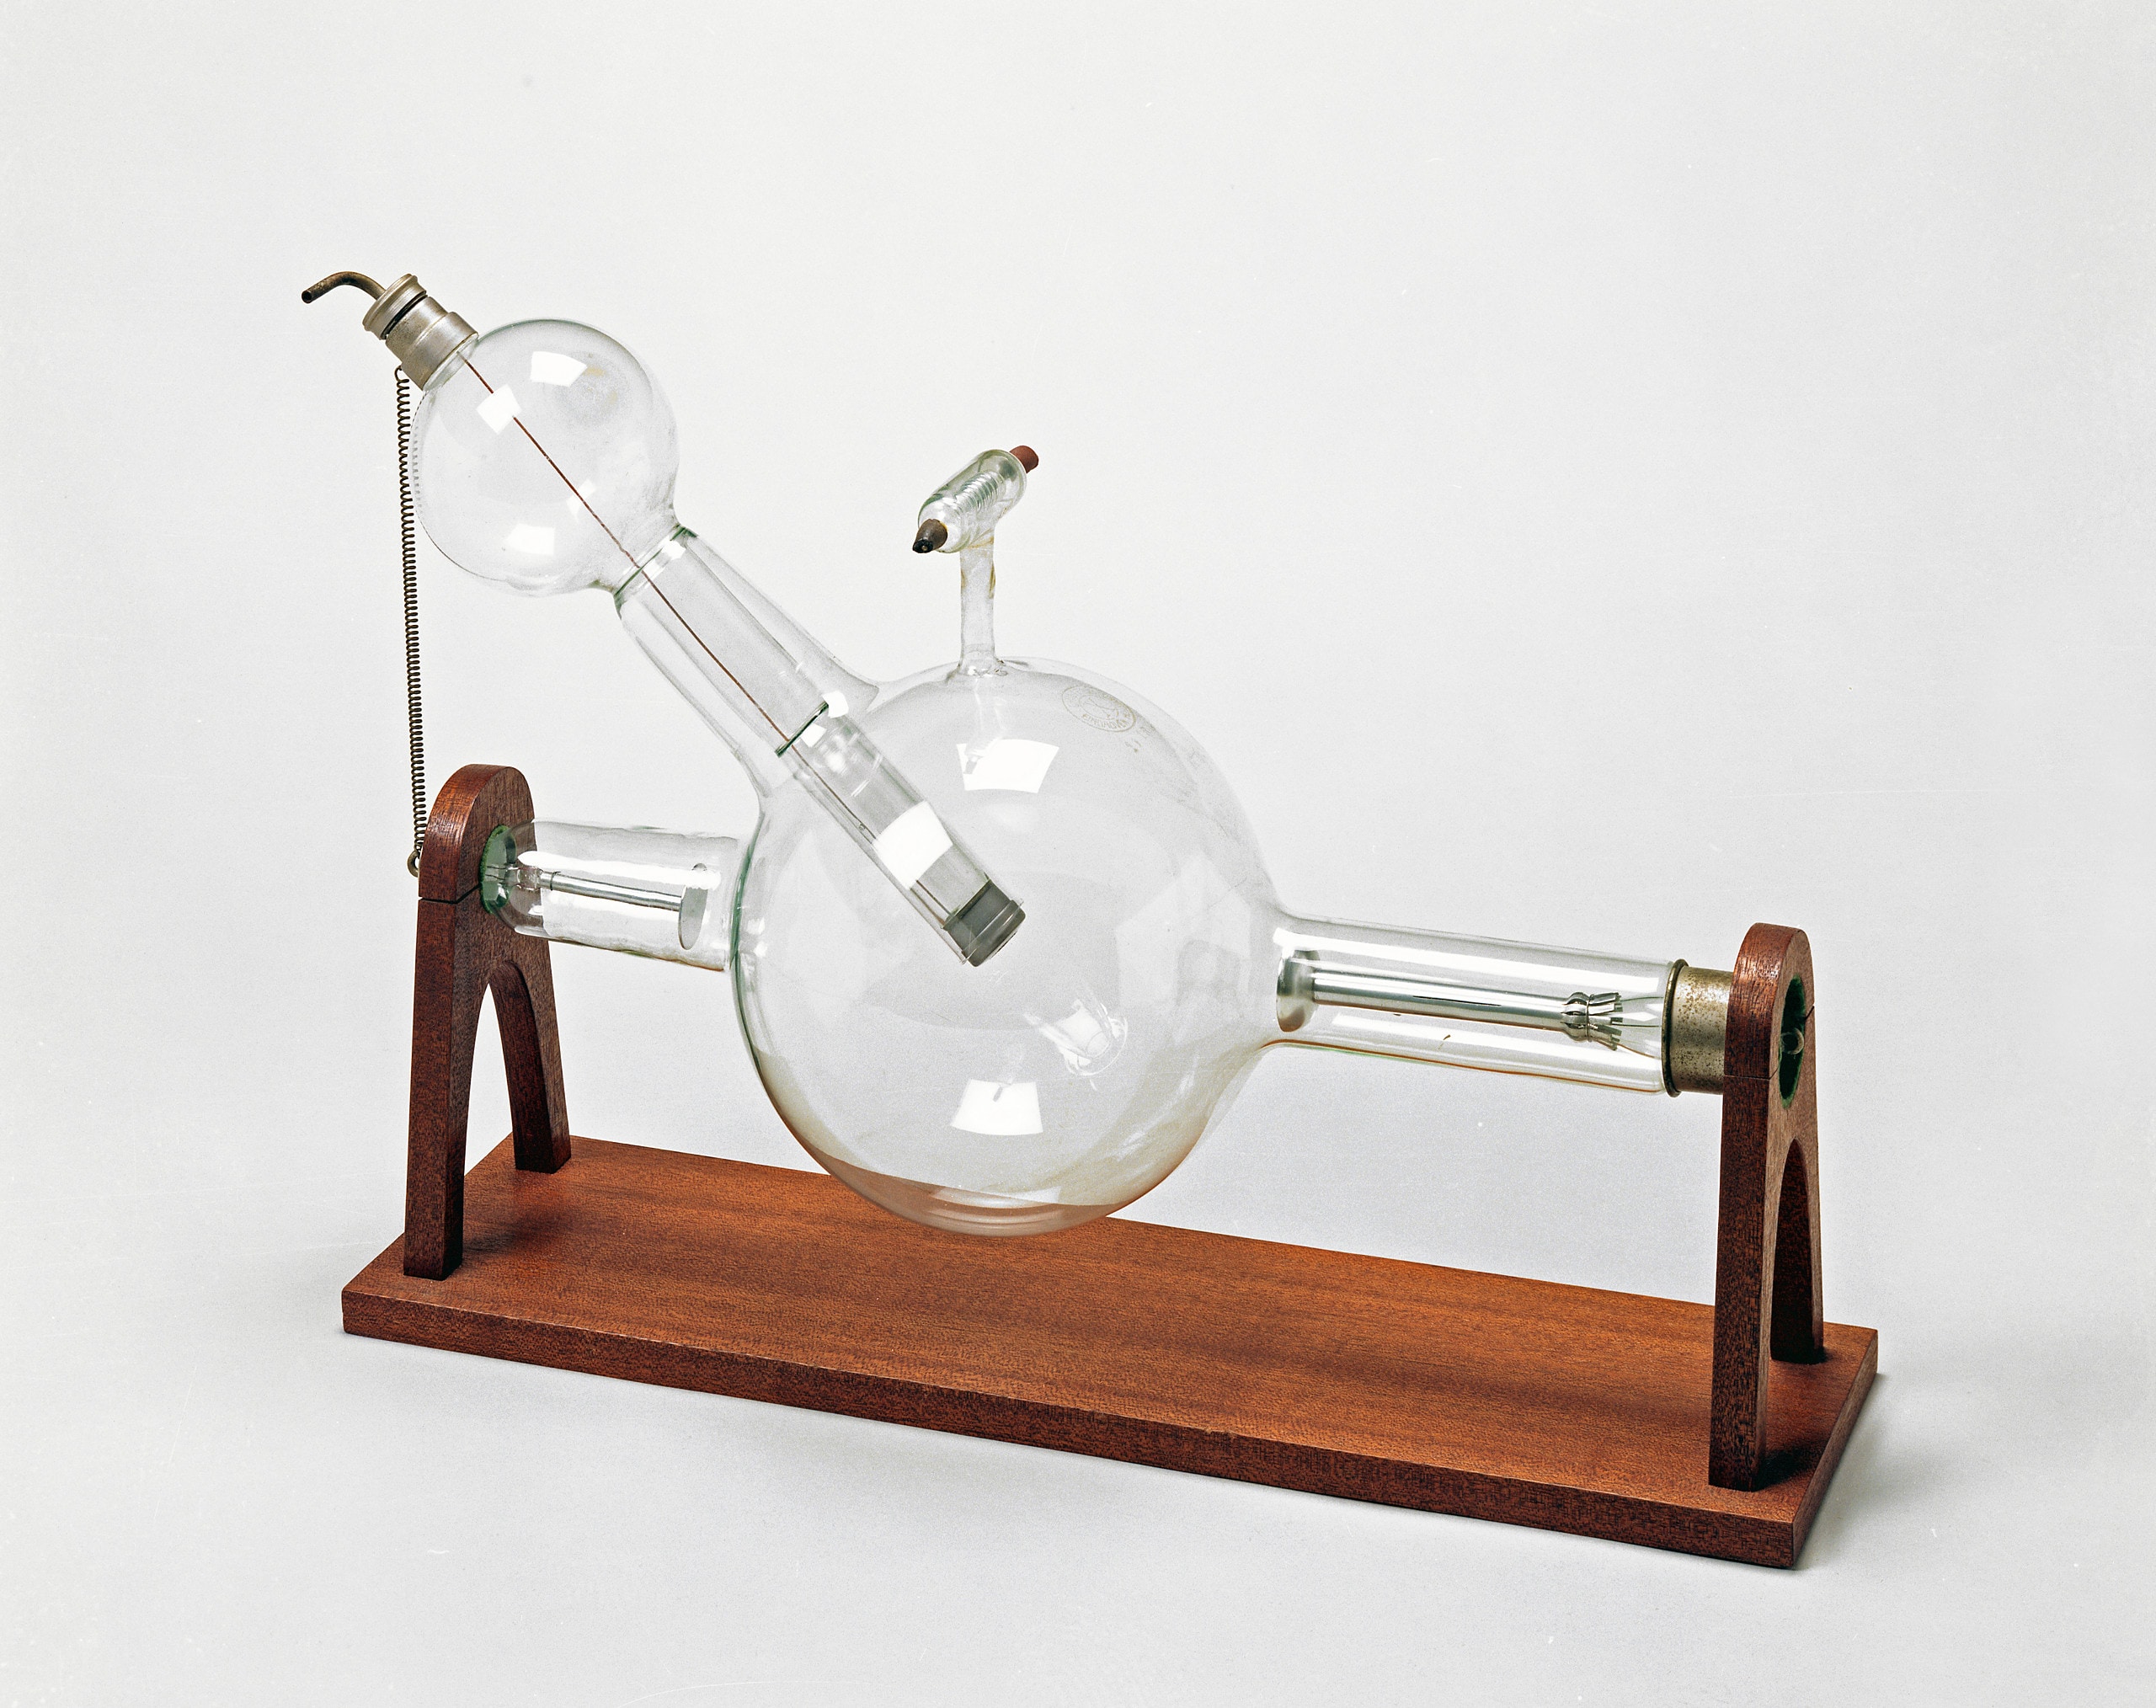 1918 – Philips first X-ray tube